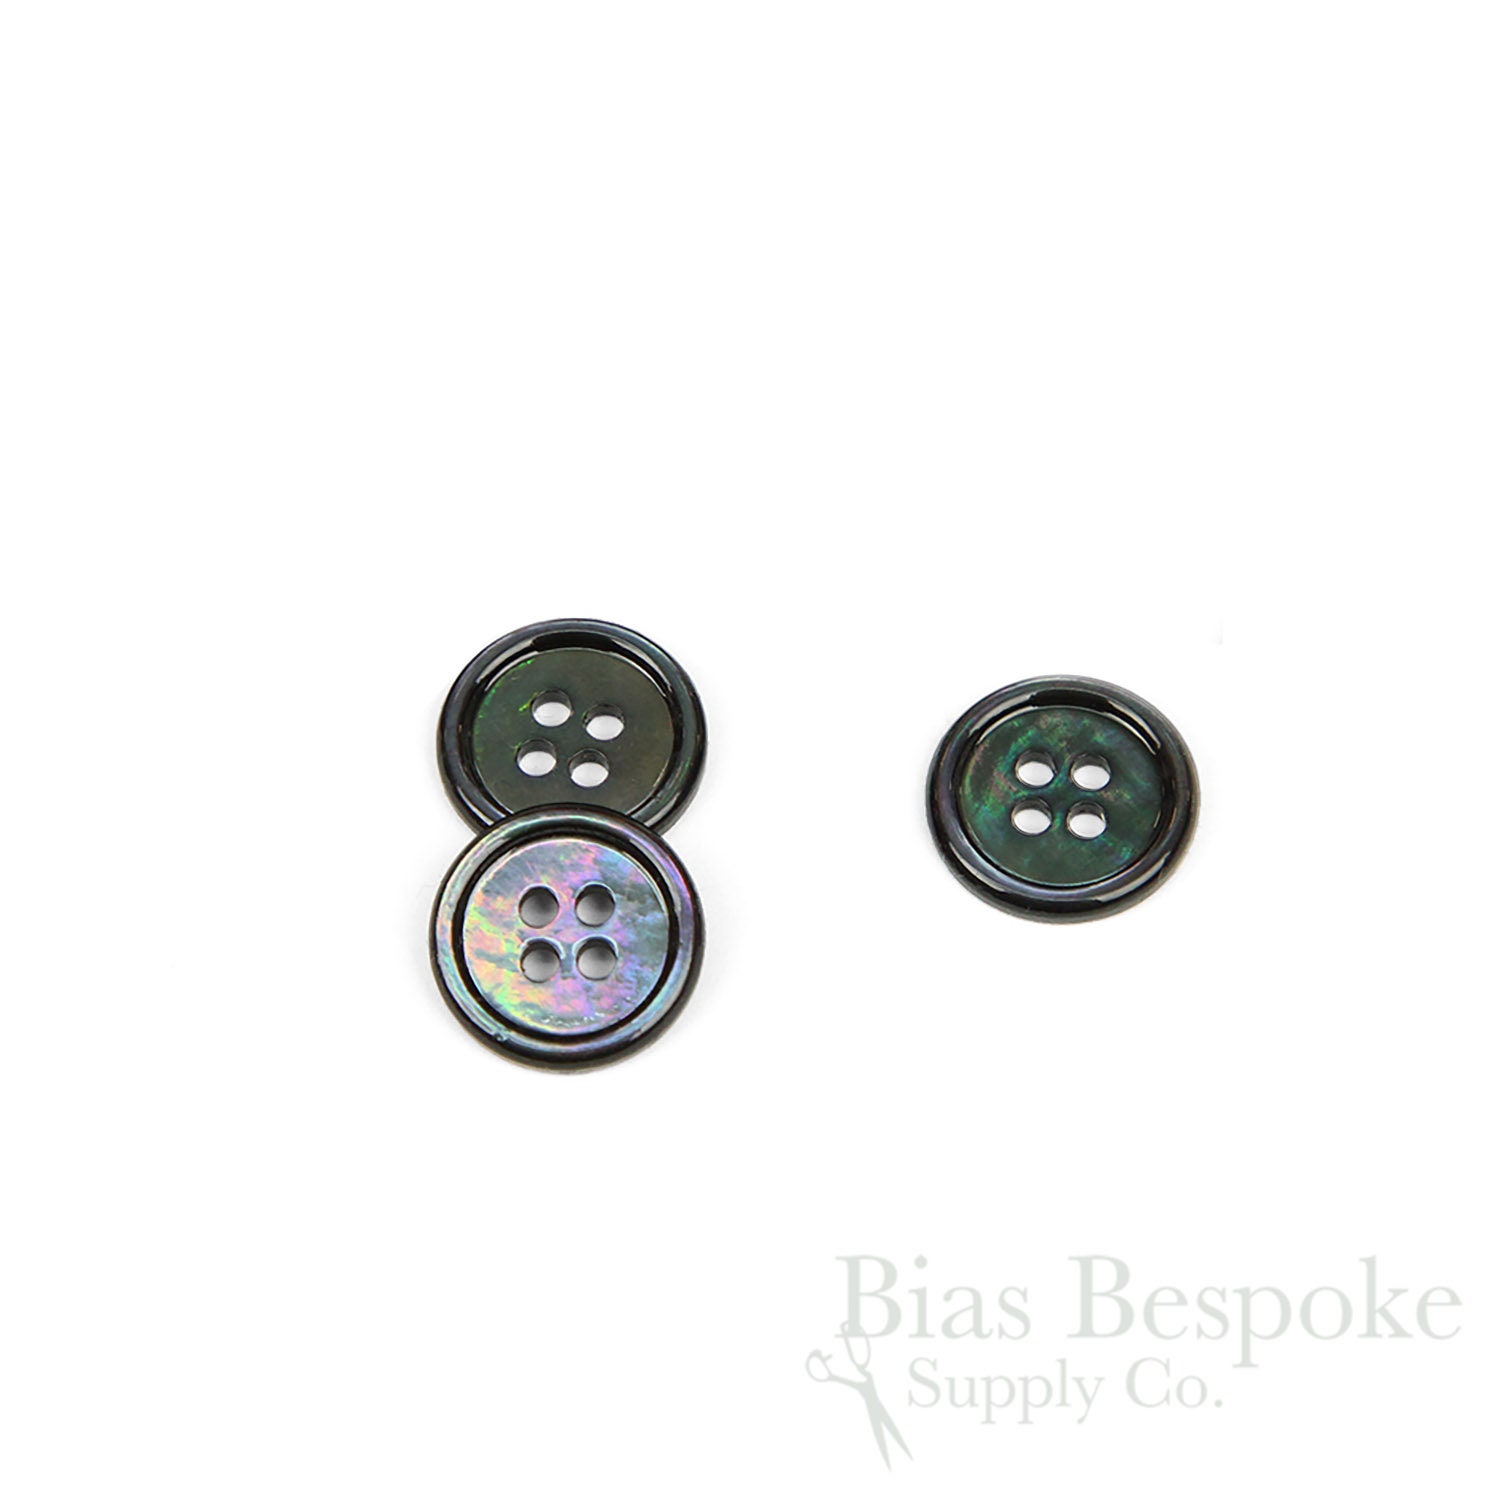 TITO Gray Blue Genuine Mother of Pearl Buttons for Shirts, Suits